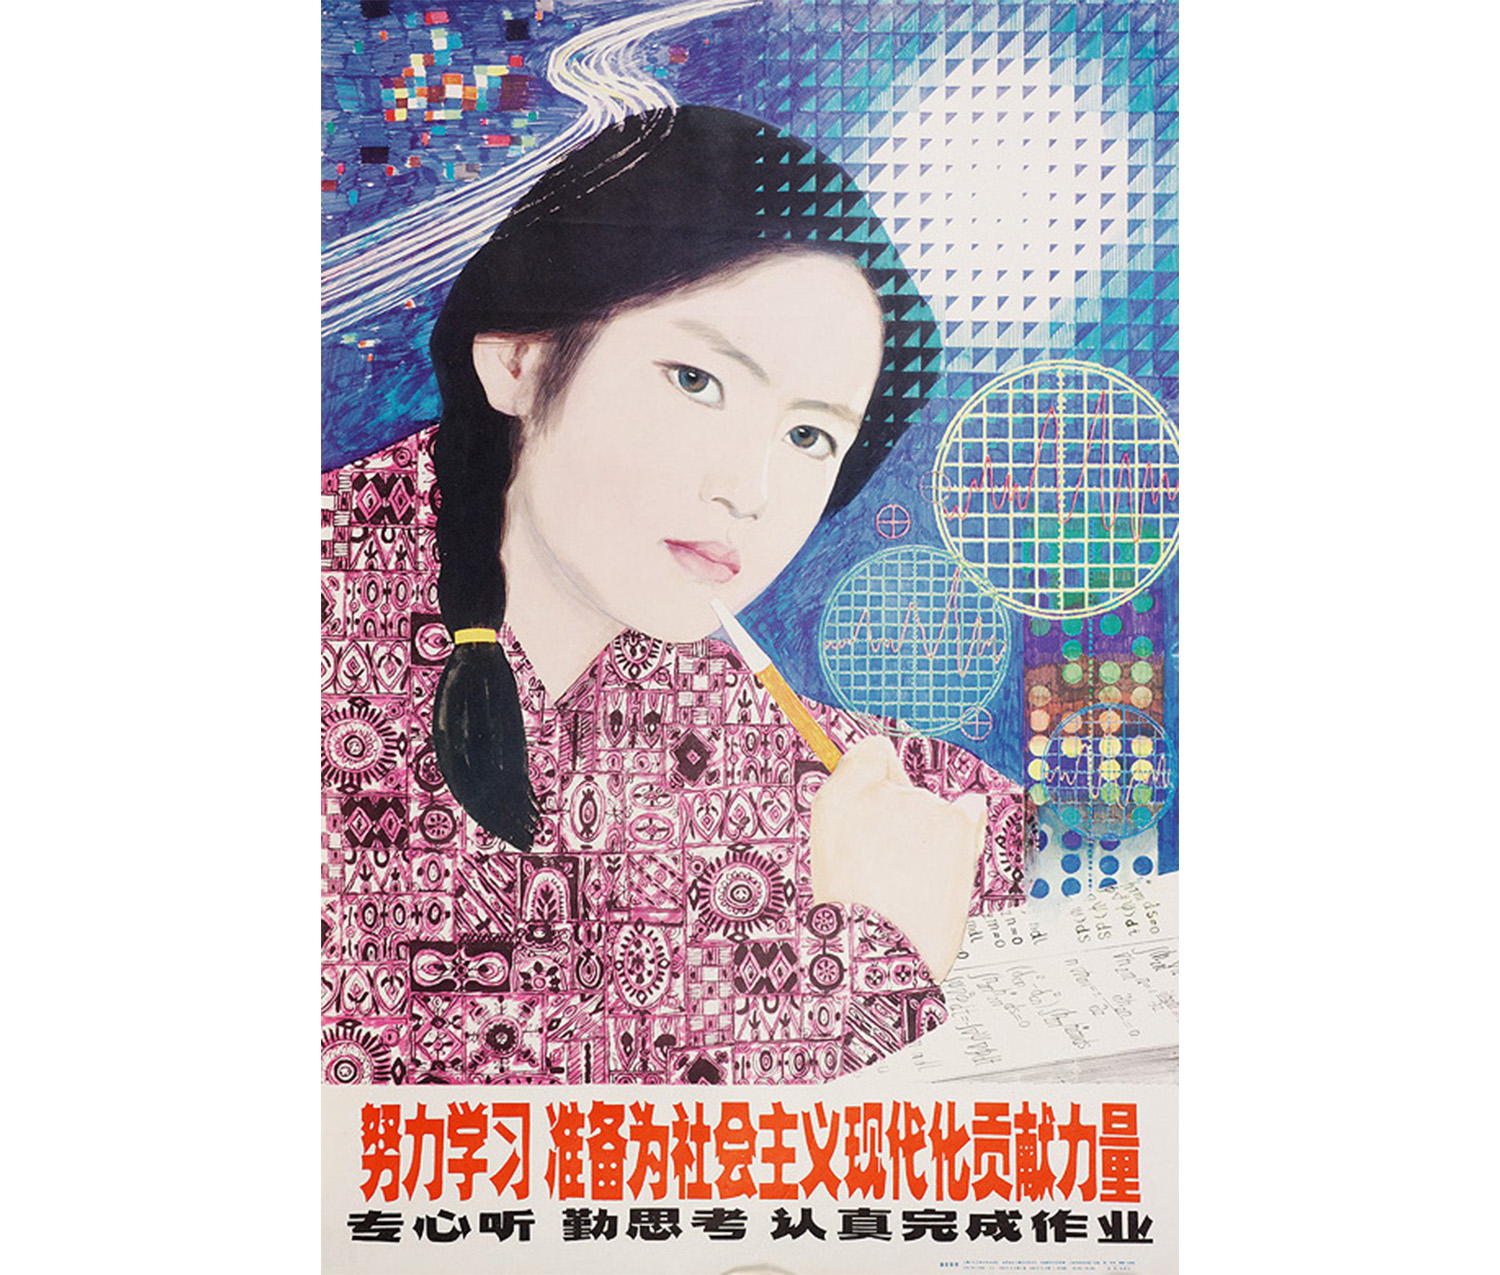 young woman with braided hair and brightly printed blouse holding pen against her chin with her proper right hand, elbows on table holding a sheet of paper with text on it, background of squares, circles, diamonds and curved lines suggesting moving lights, text across bottom in red and black; title printed in Chinese characters